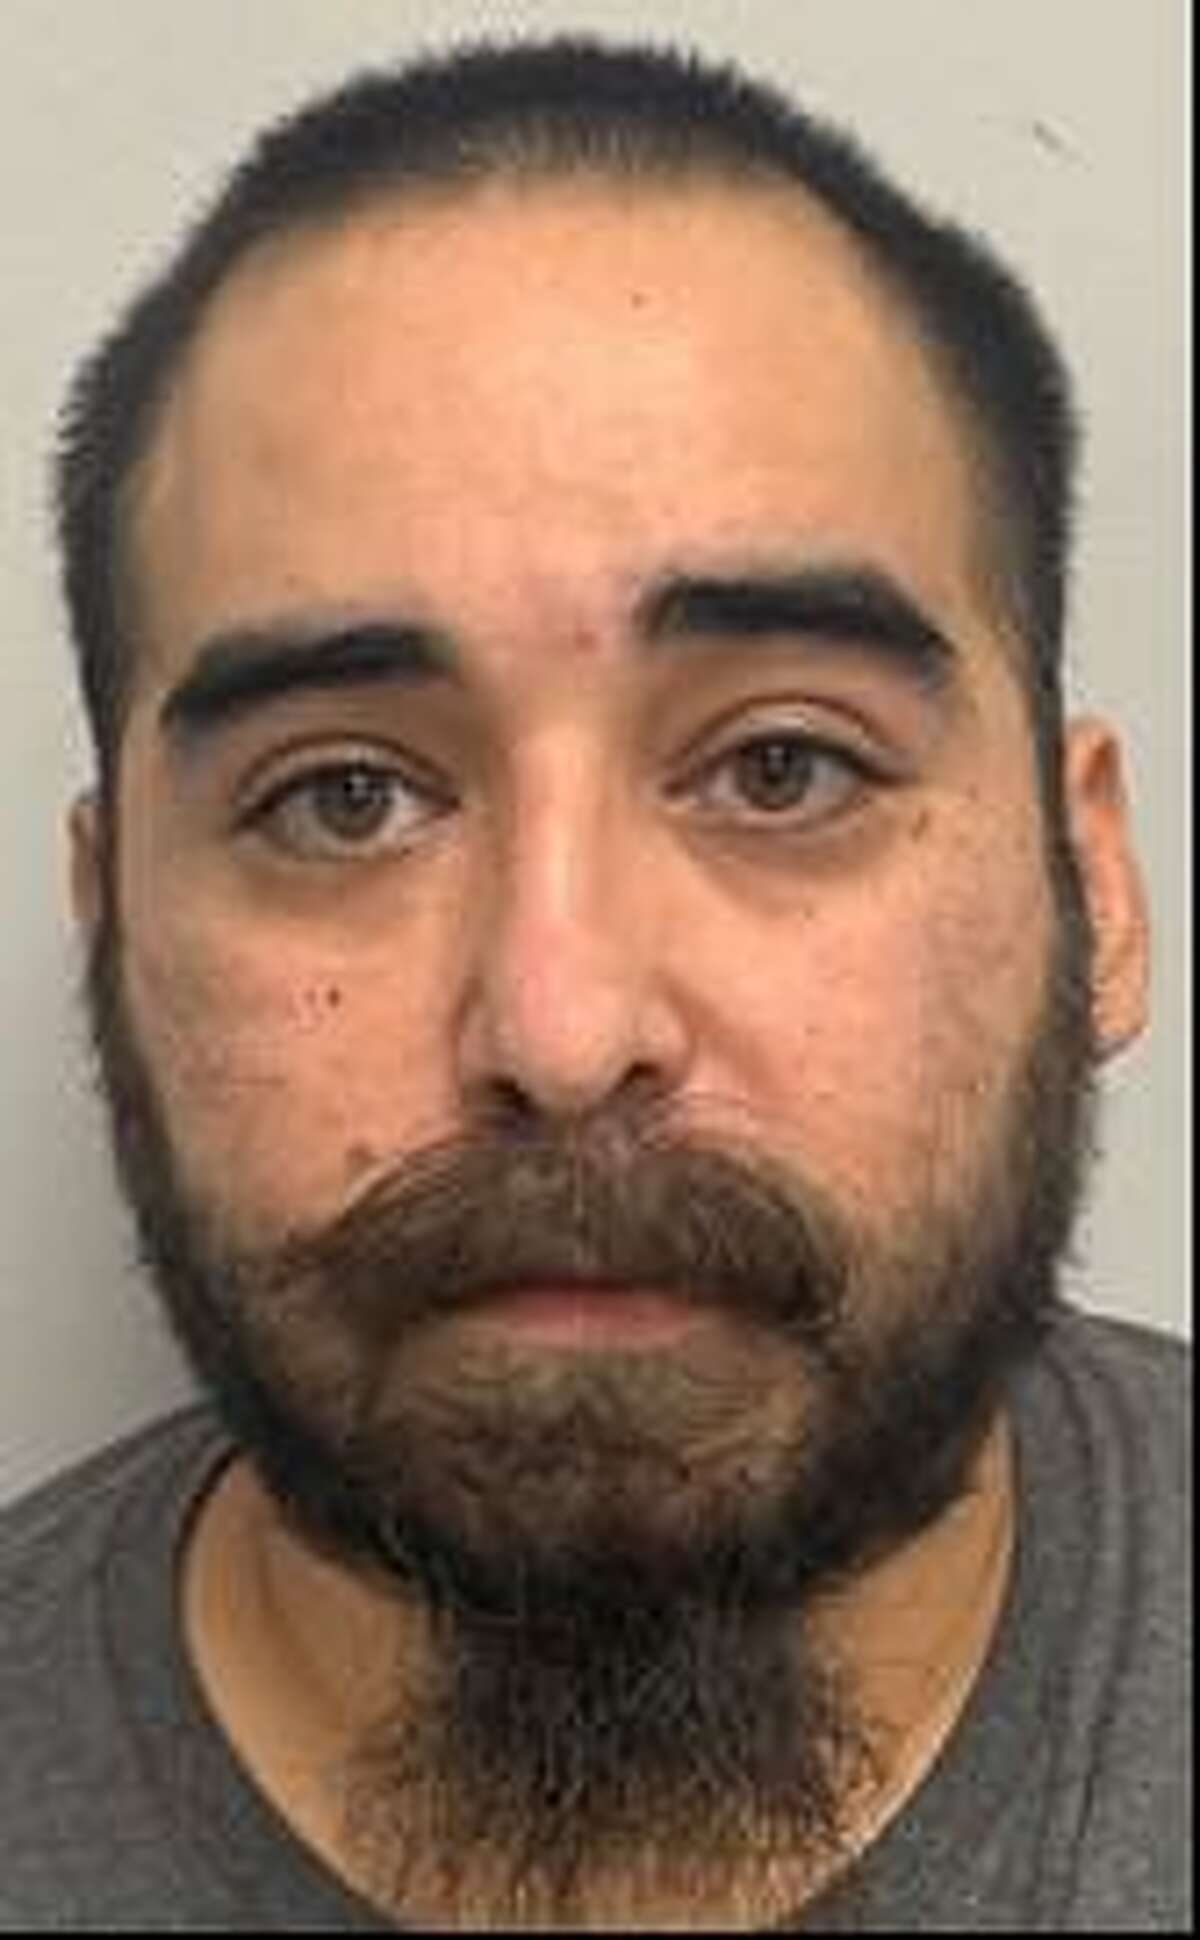 Jose Tovar, 31, was arrested Feb. 17, 2022, on suspicion of numerous sexual assault and child pornography charges.